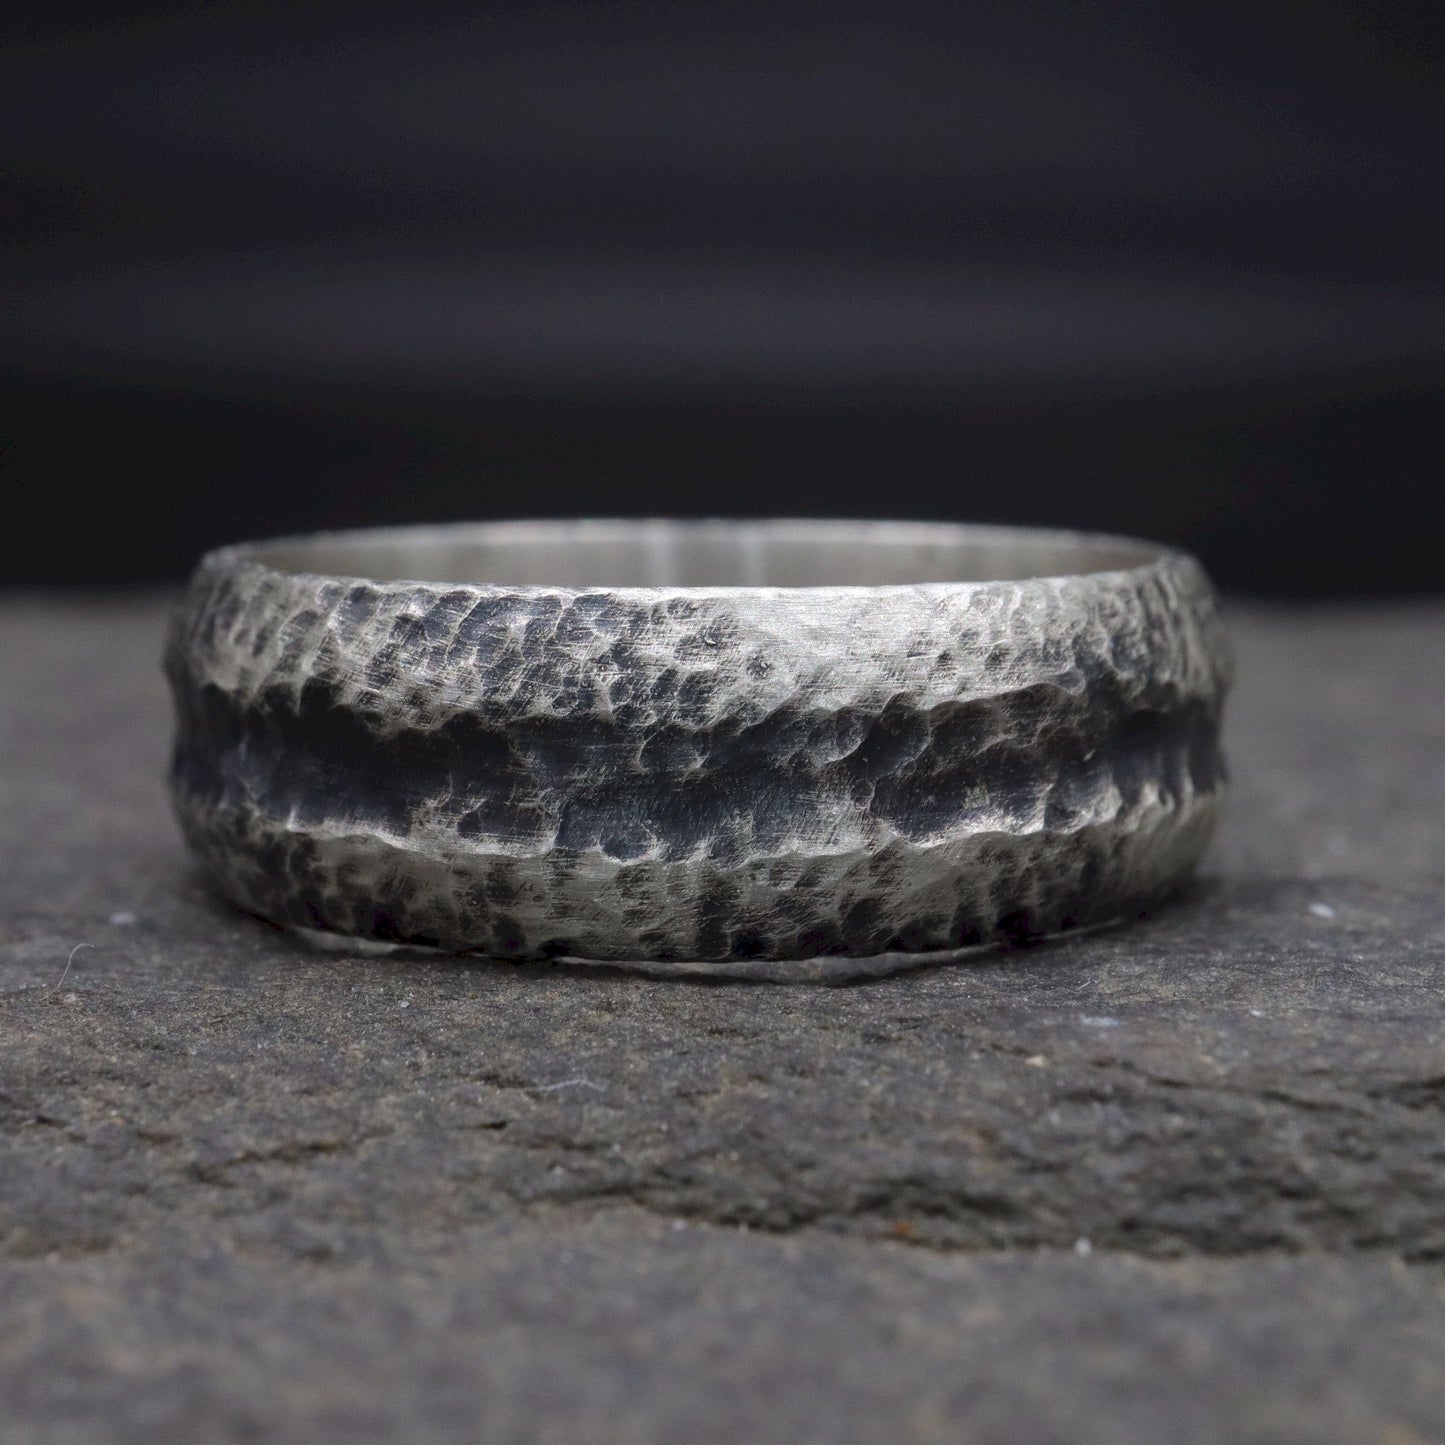 Black silver mans promise, engagement  or wedding ring with a carved rustic pattern, Fleetwith Pike design.